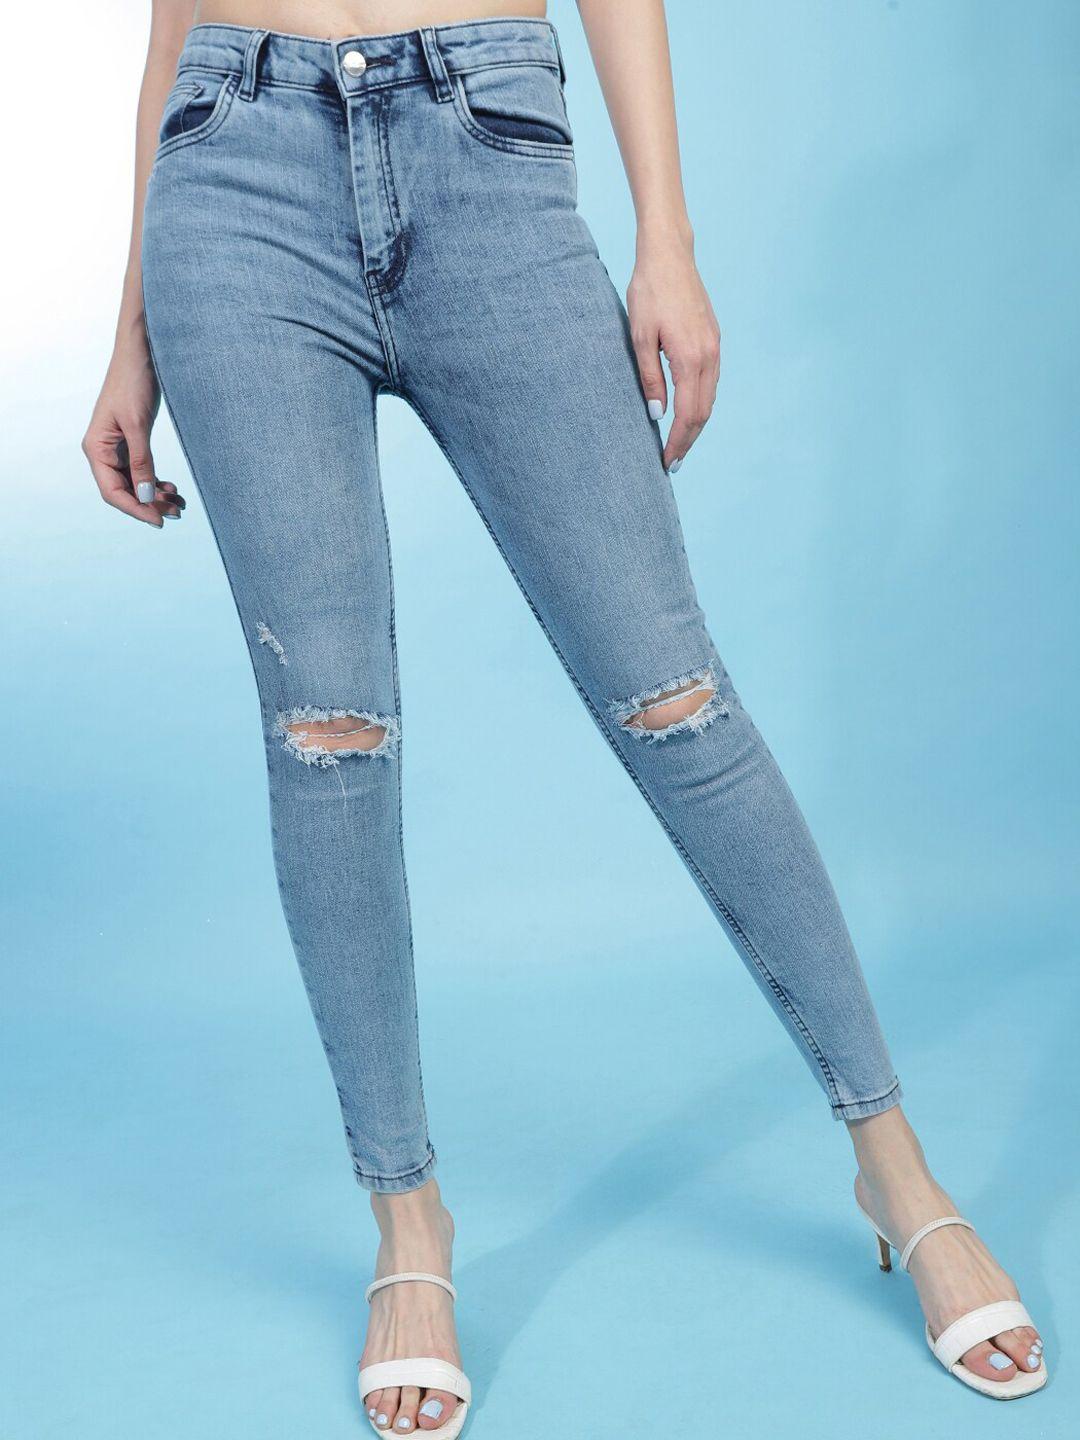 freehand-women-slim-fit-high-rise-slash-knee-stretchable-jeans